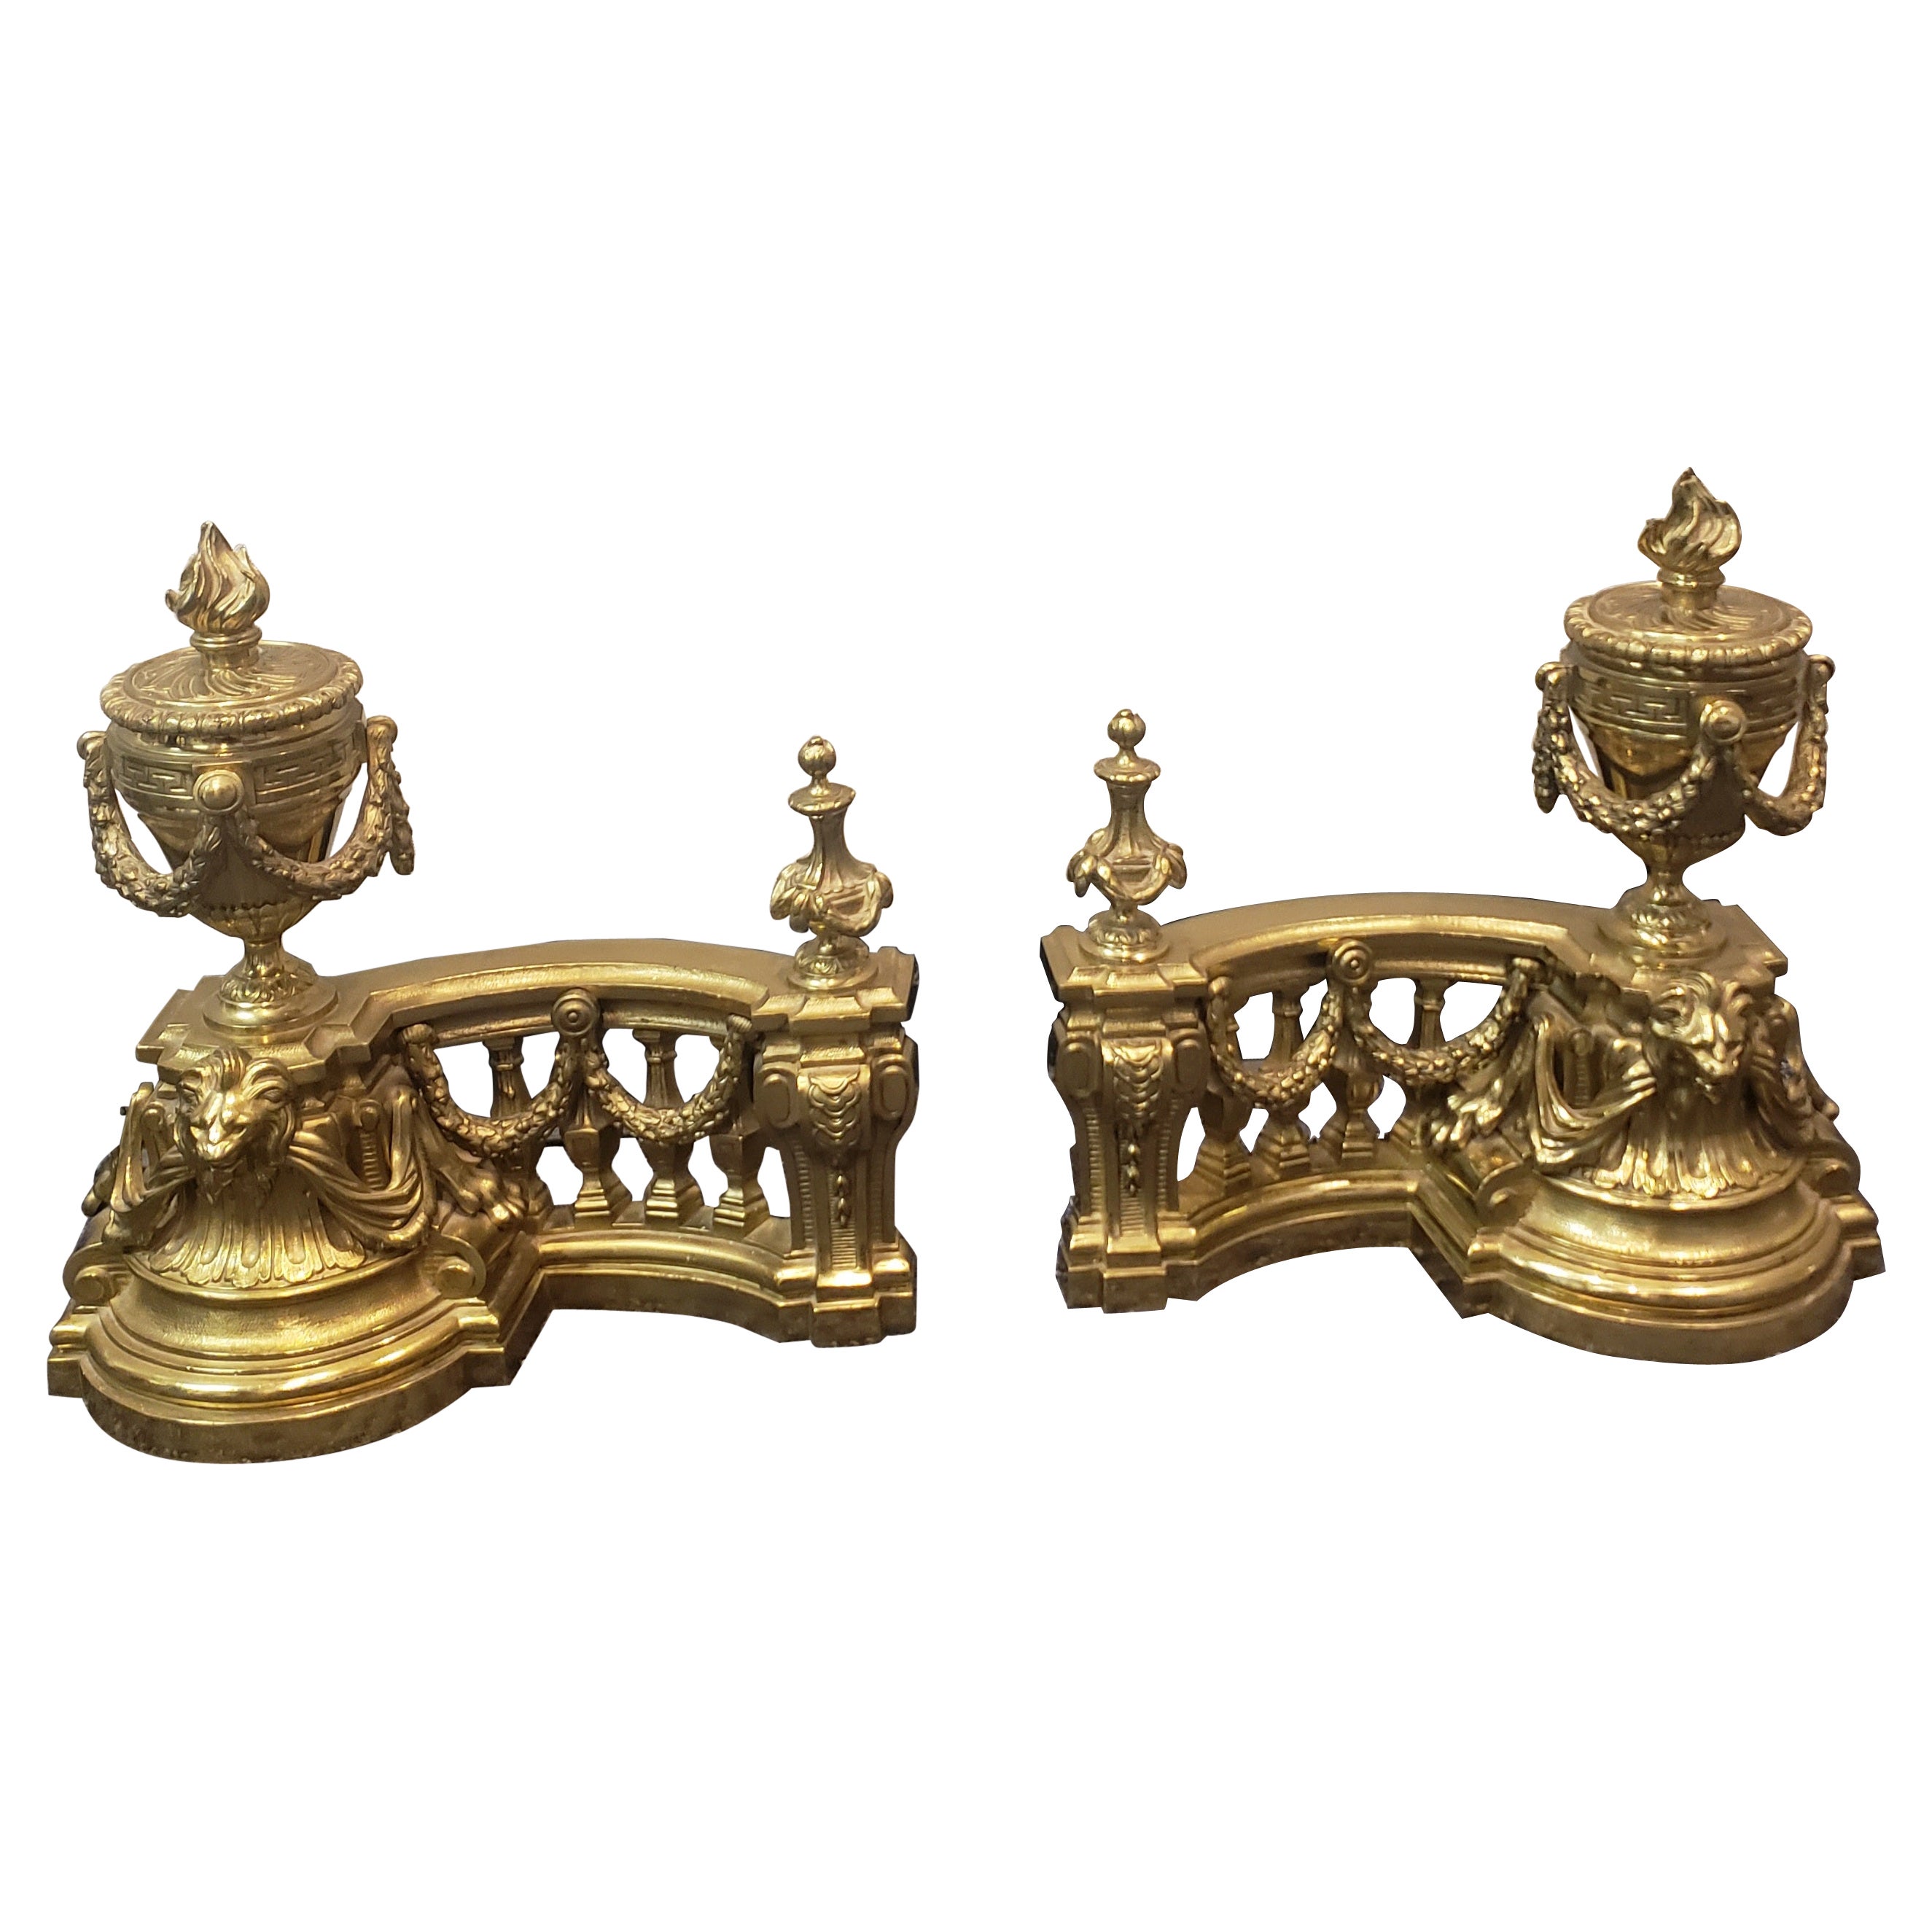 Pair of Antique French 18th Century Gilt Bronze Firedogs/Chenets